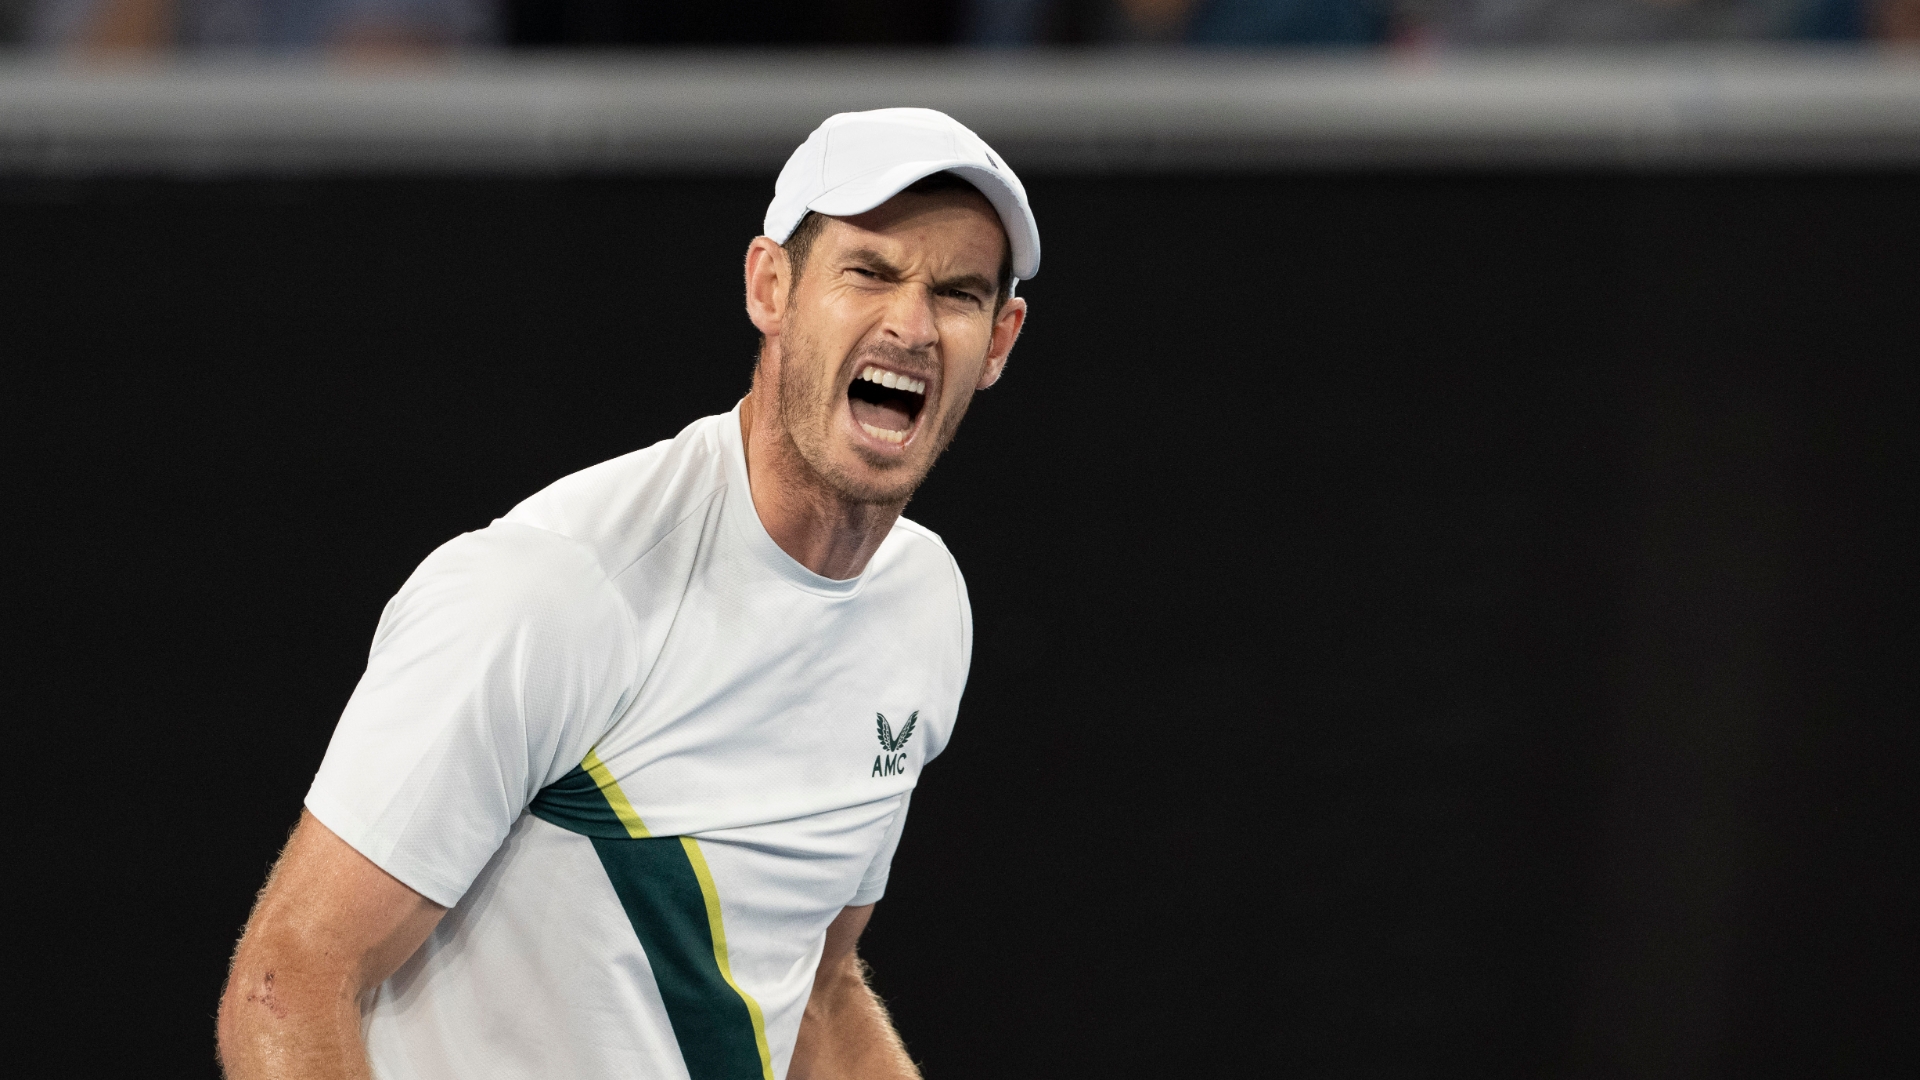 Andy Murray wins break point after epic rally - Stream the Video